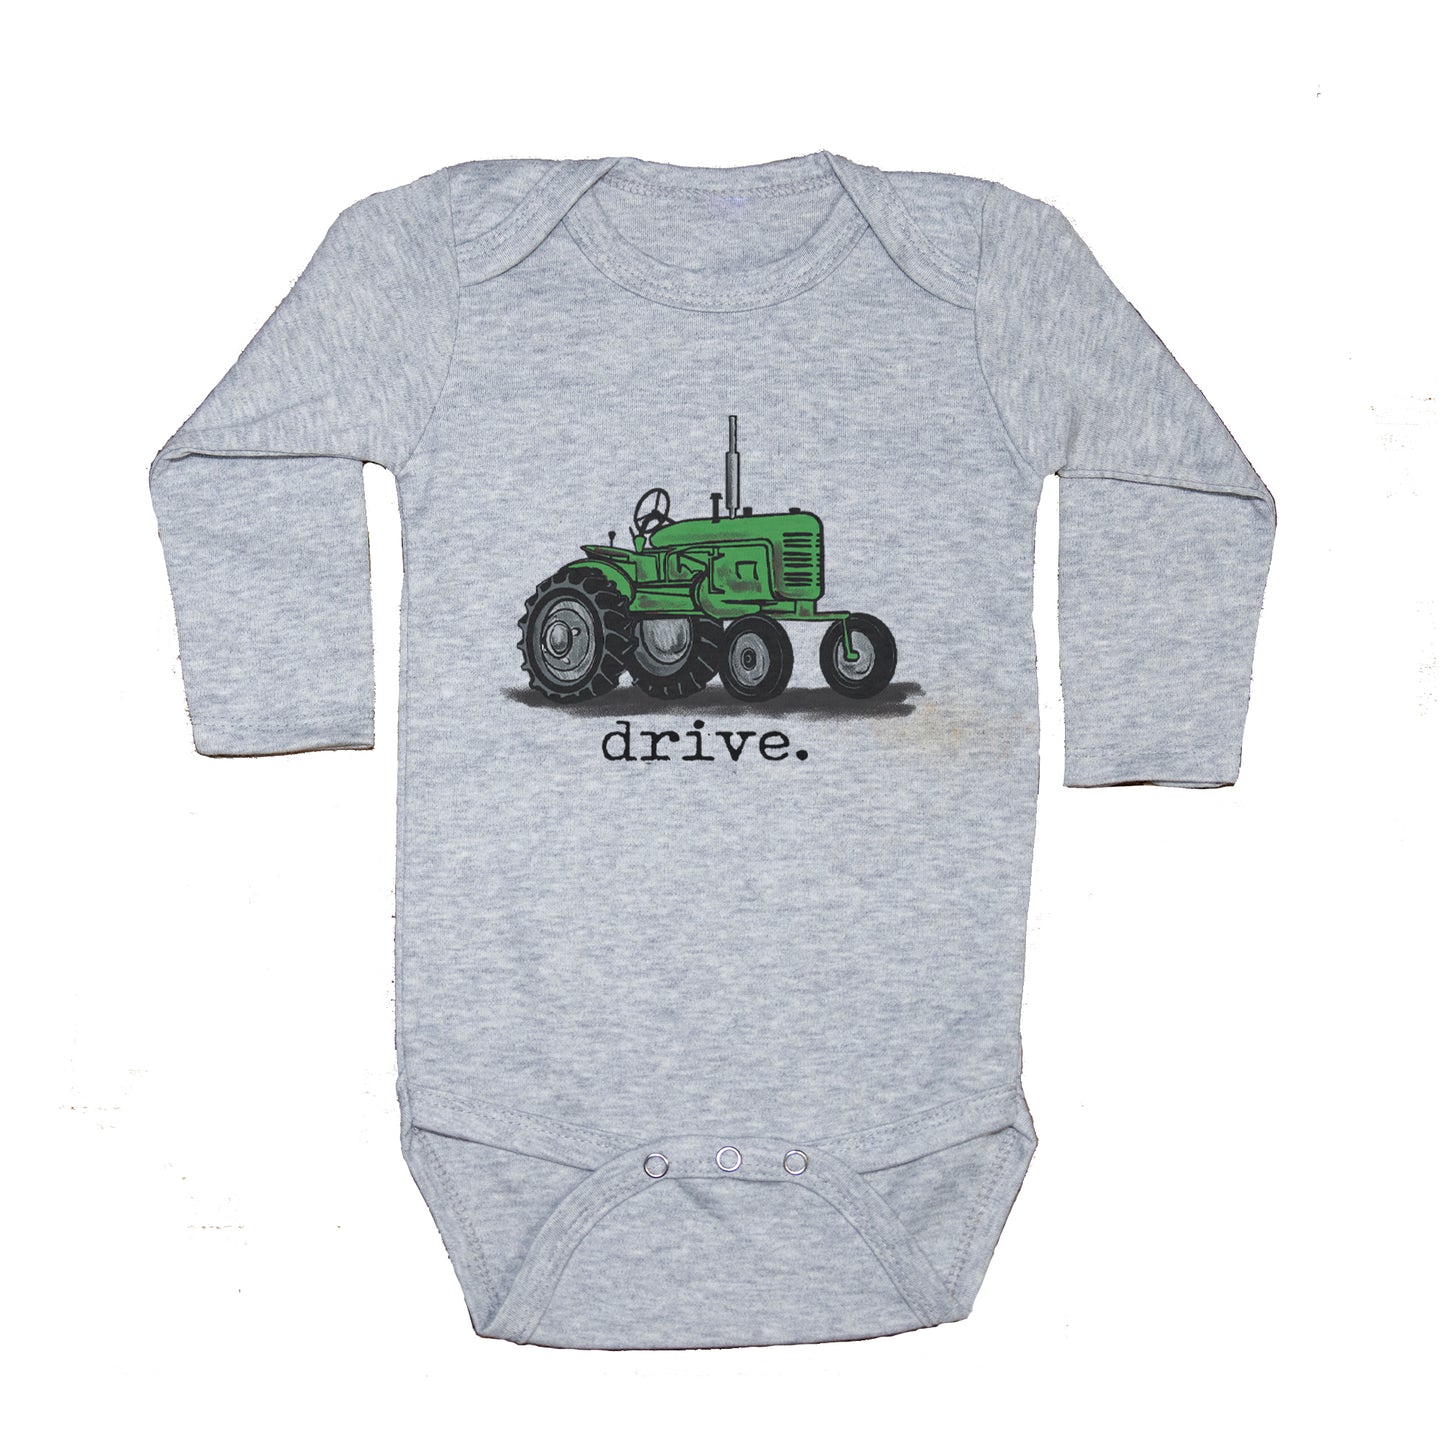 "Drive" Green tractor Grey Body suit